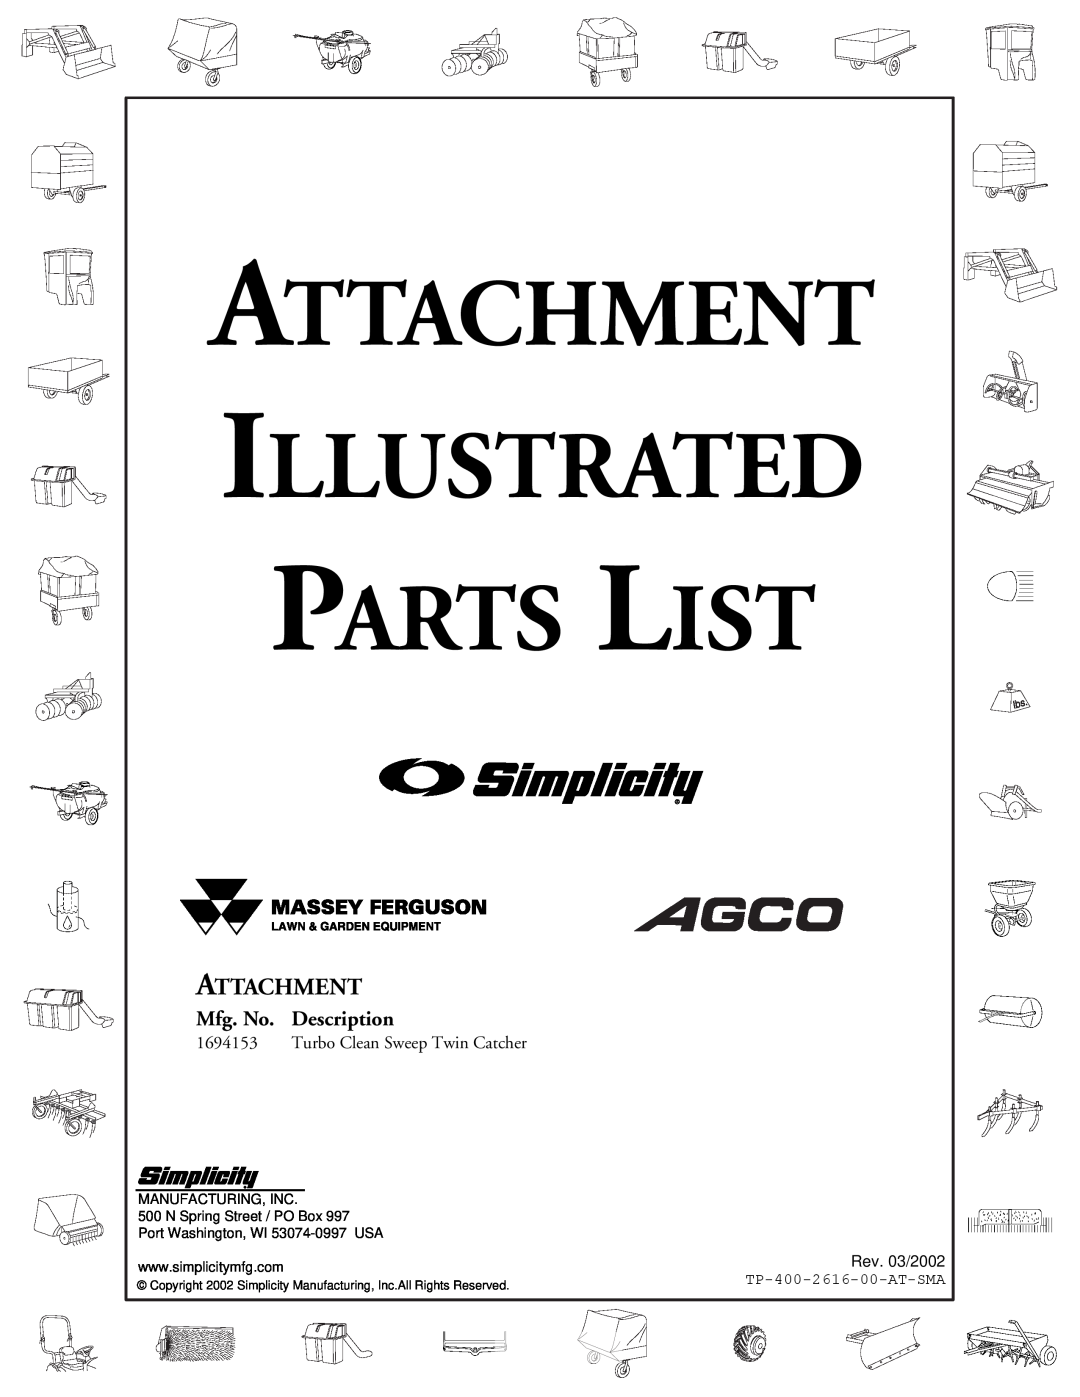 Simplicity 1694153 manual Attachment Illustrated Parts List, Mfg. No. Description, Turbo Clean Sweep Twin Catcher 